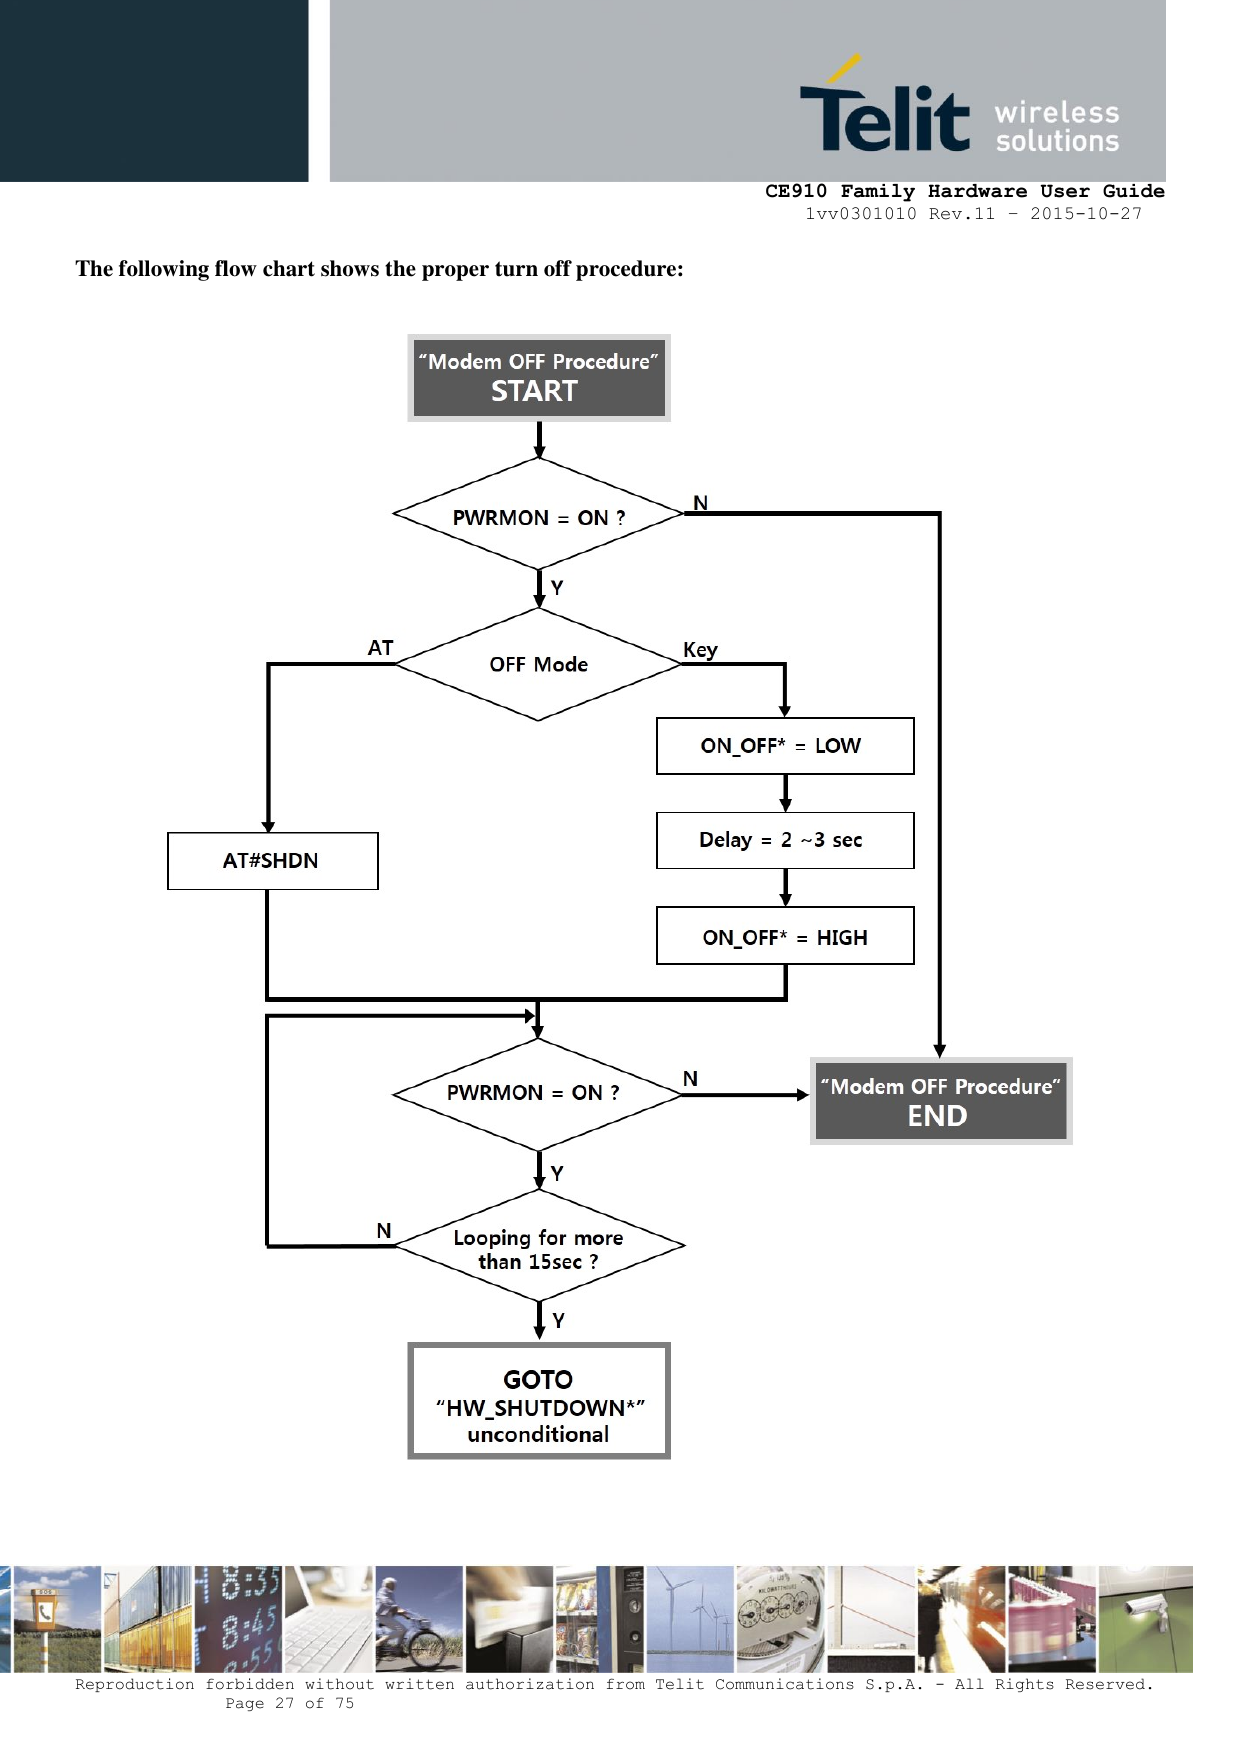     CE910 Family Hardware User Guide 1vv0301010 Rev.11 – 2015-10-27 Reproduction forbidden without written authorization from Telit Communications S.p.A. - All Rights Reserved.    Page 27 of 75                                                     The following flow chart shows the proper turn off procedure:     